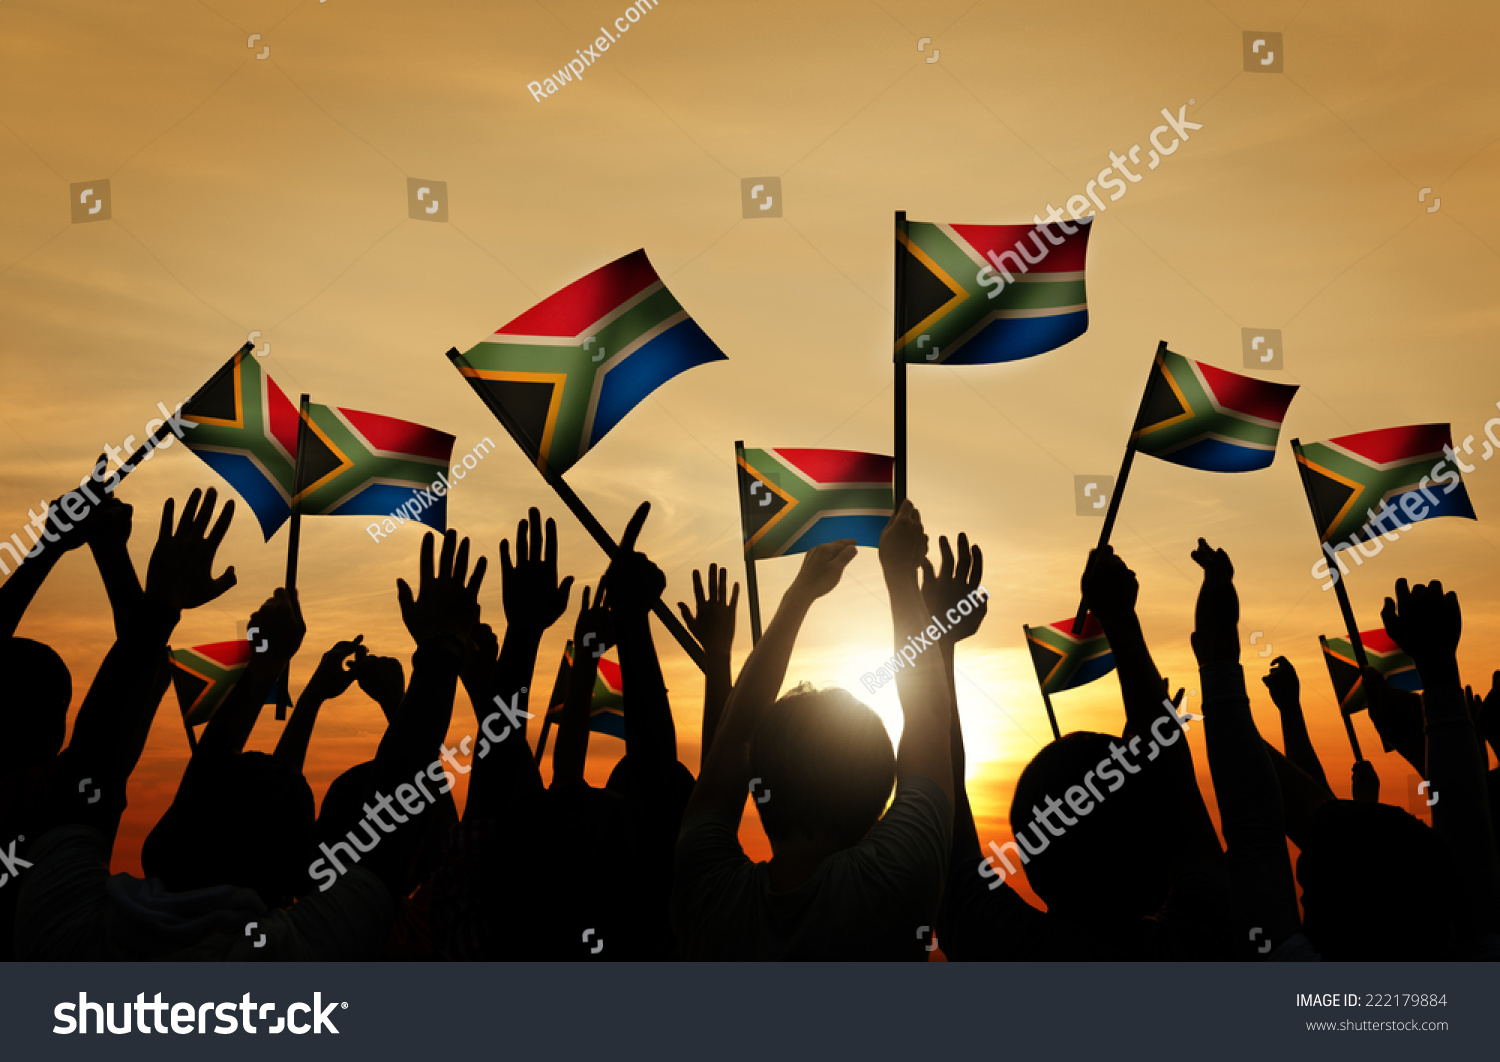 Group of People Waving South African Flags in Back Lit #222179884